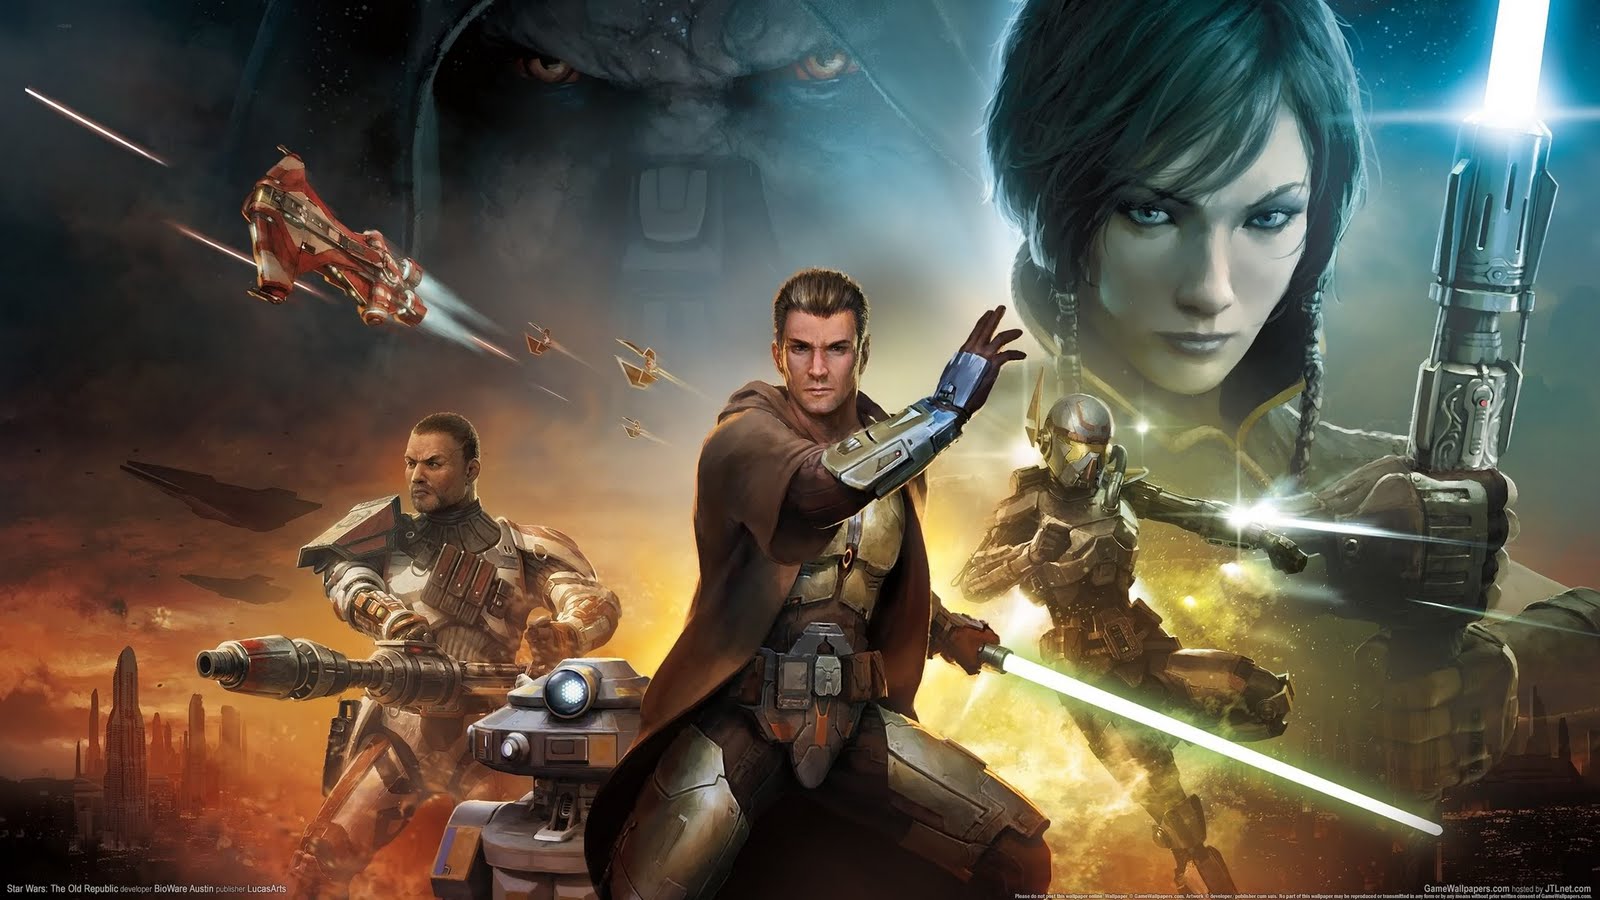 Star Wars: The Old Republic video game